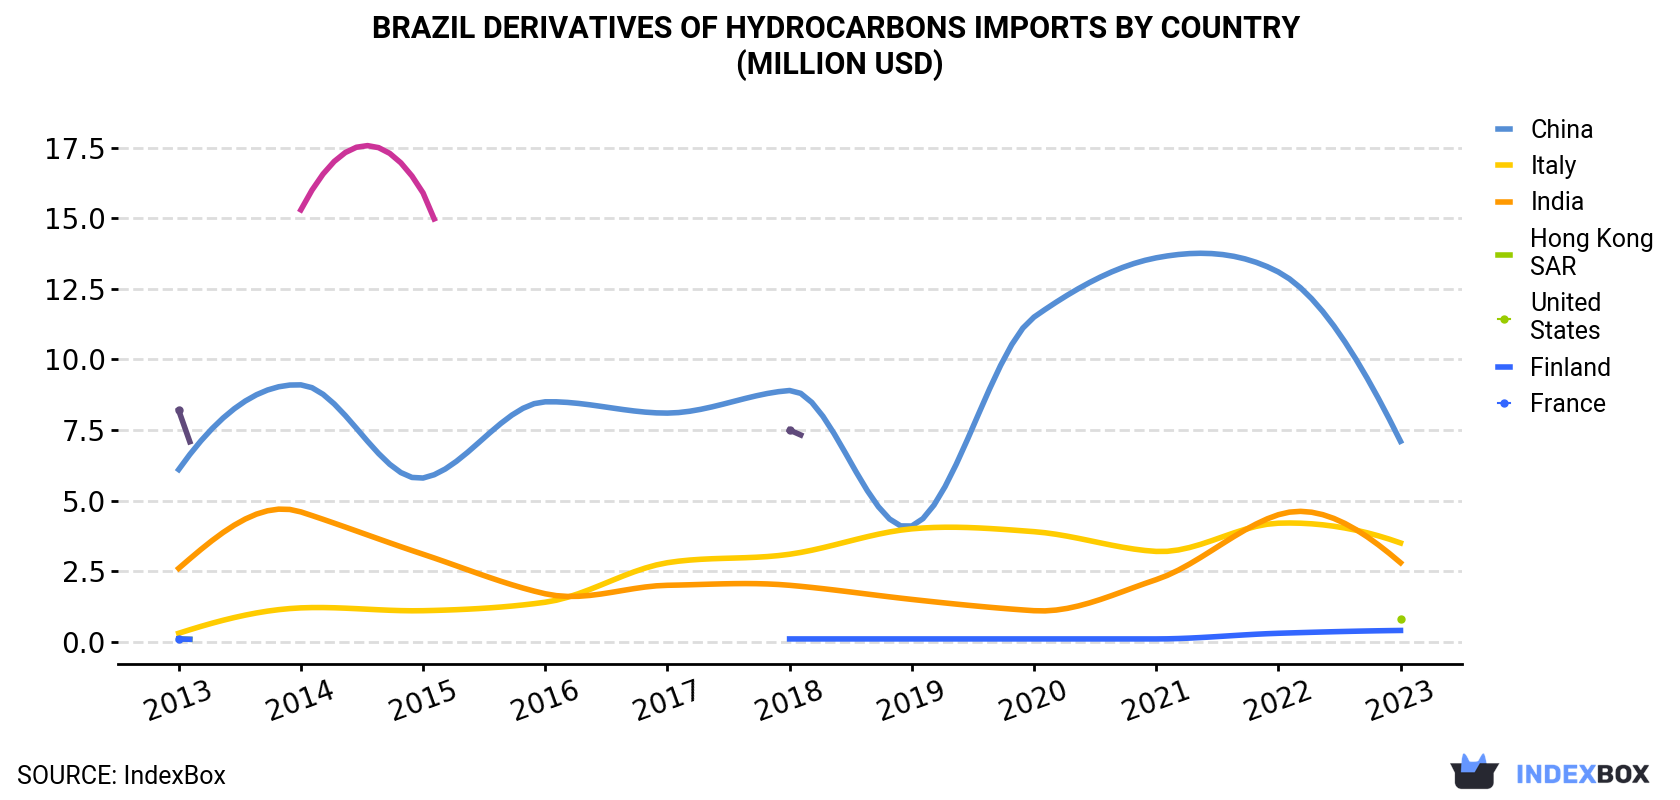 Brazil Derivatives Of Hydrocarbons Imports By Country (Million USD)